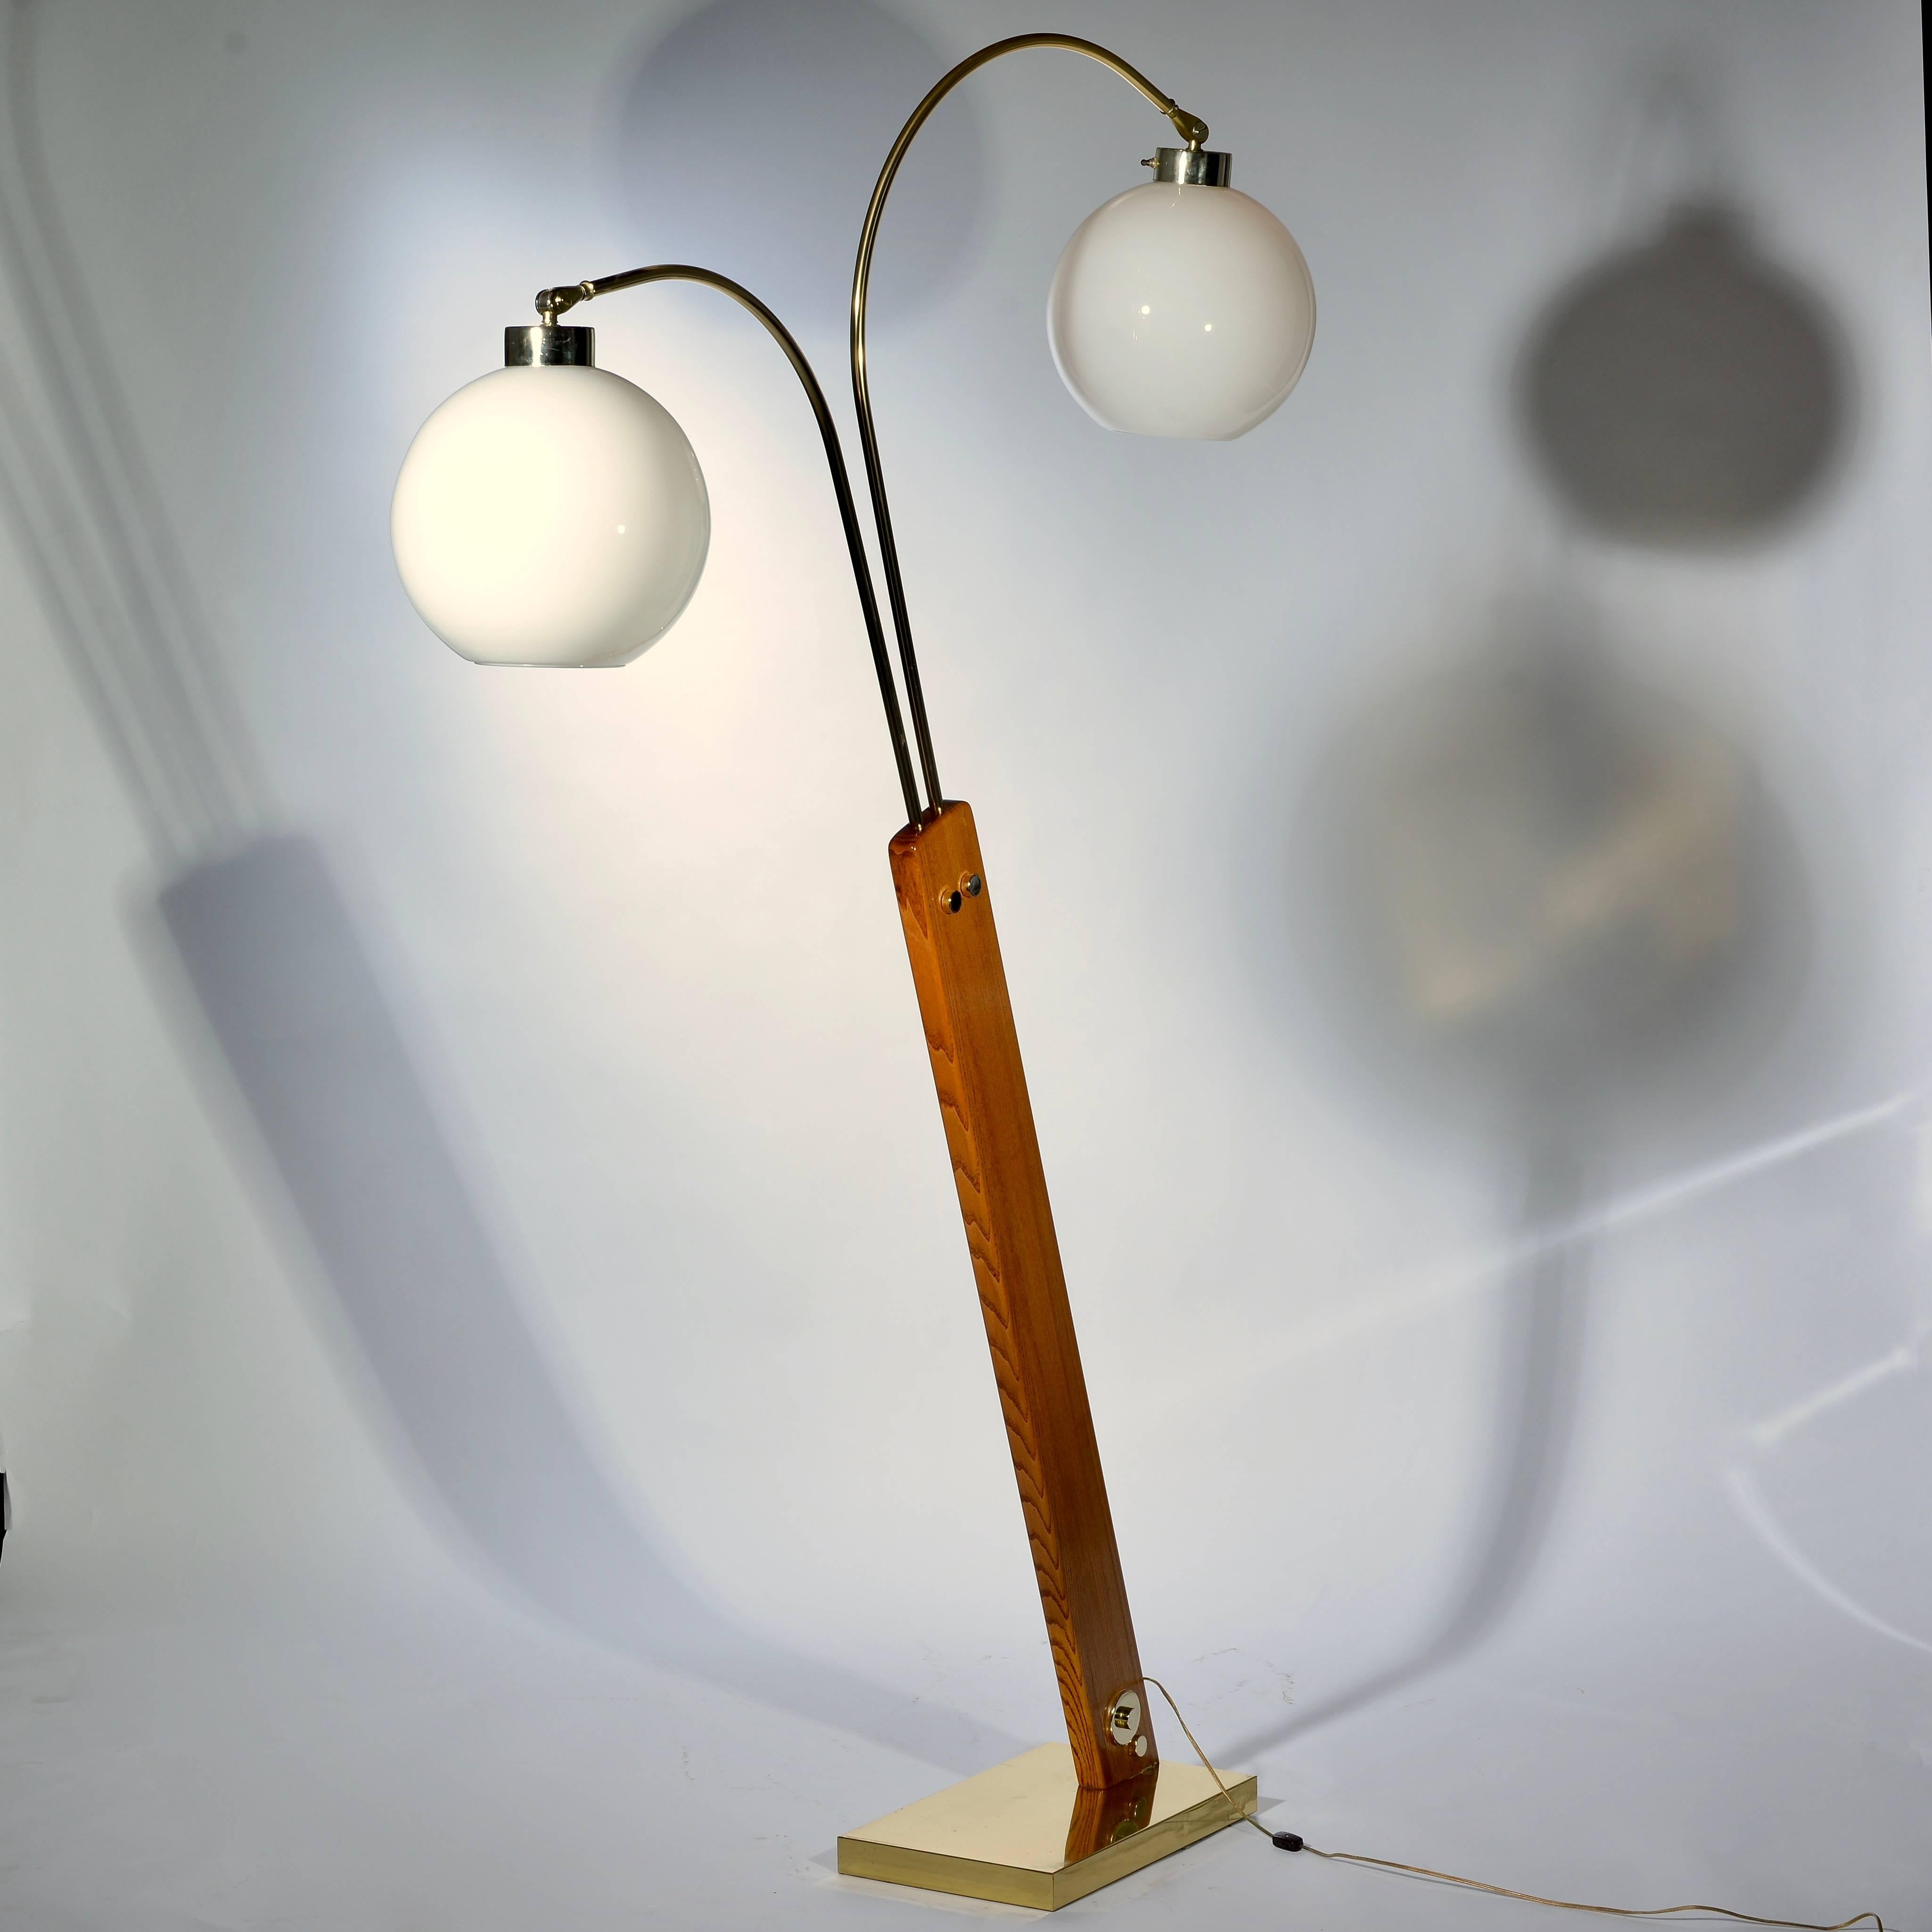 This is an amazing late 1970s floor lamp by Nova of California.